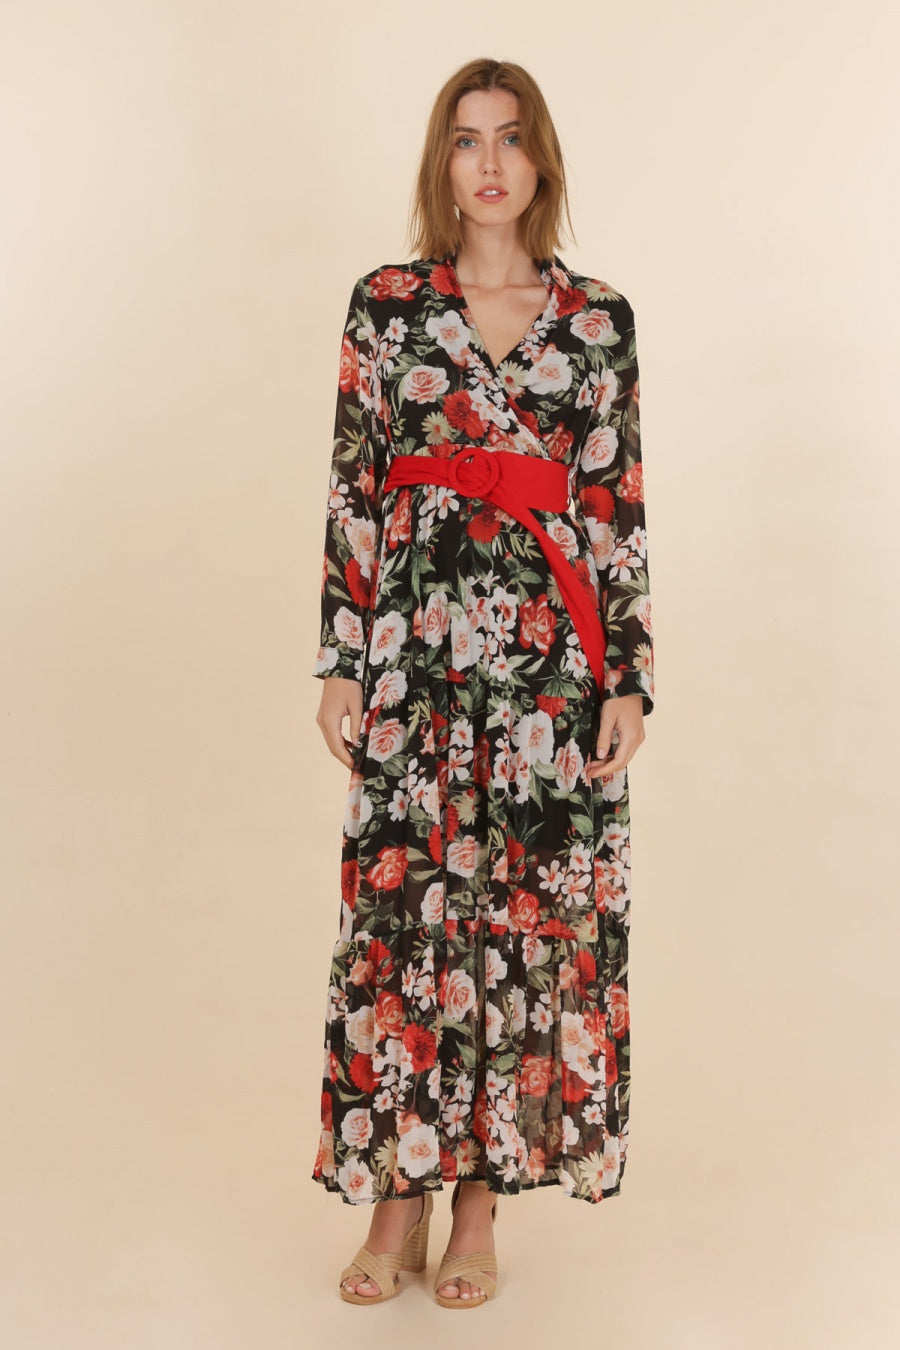 Camila black and red floral maxi ONLY SIZE 10 LEFT